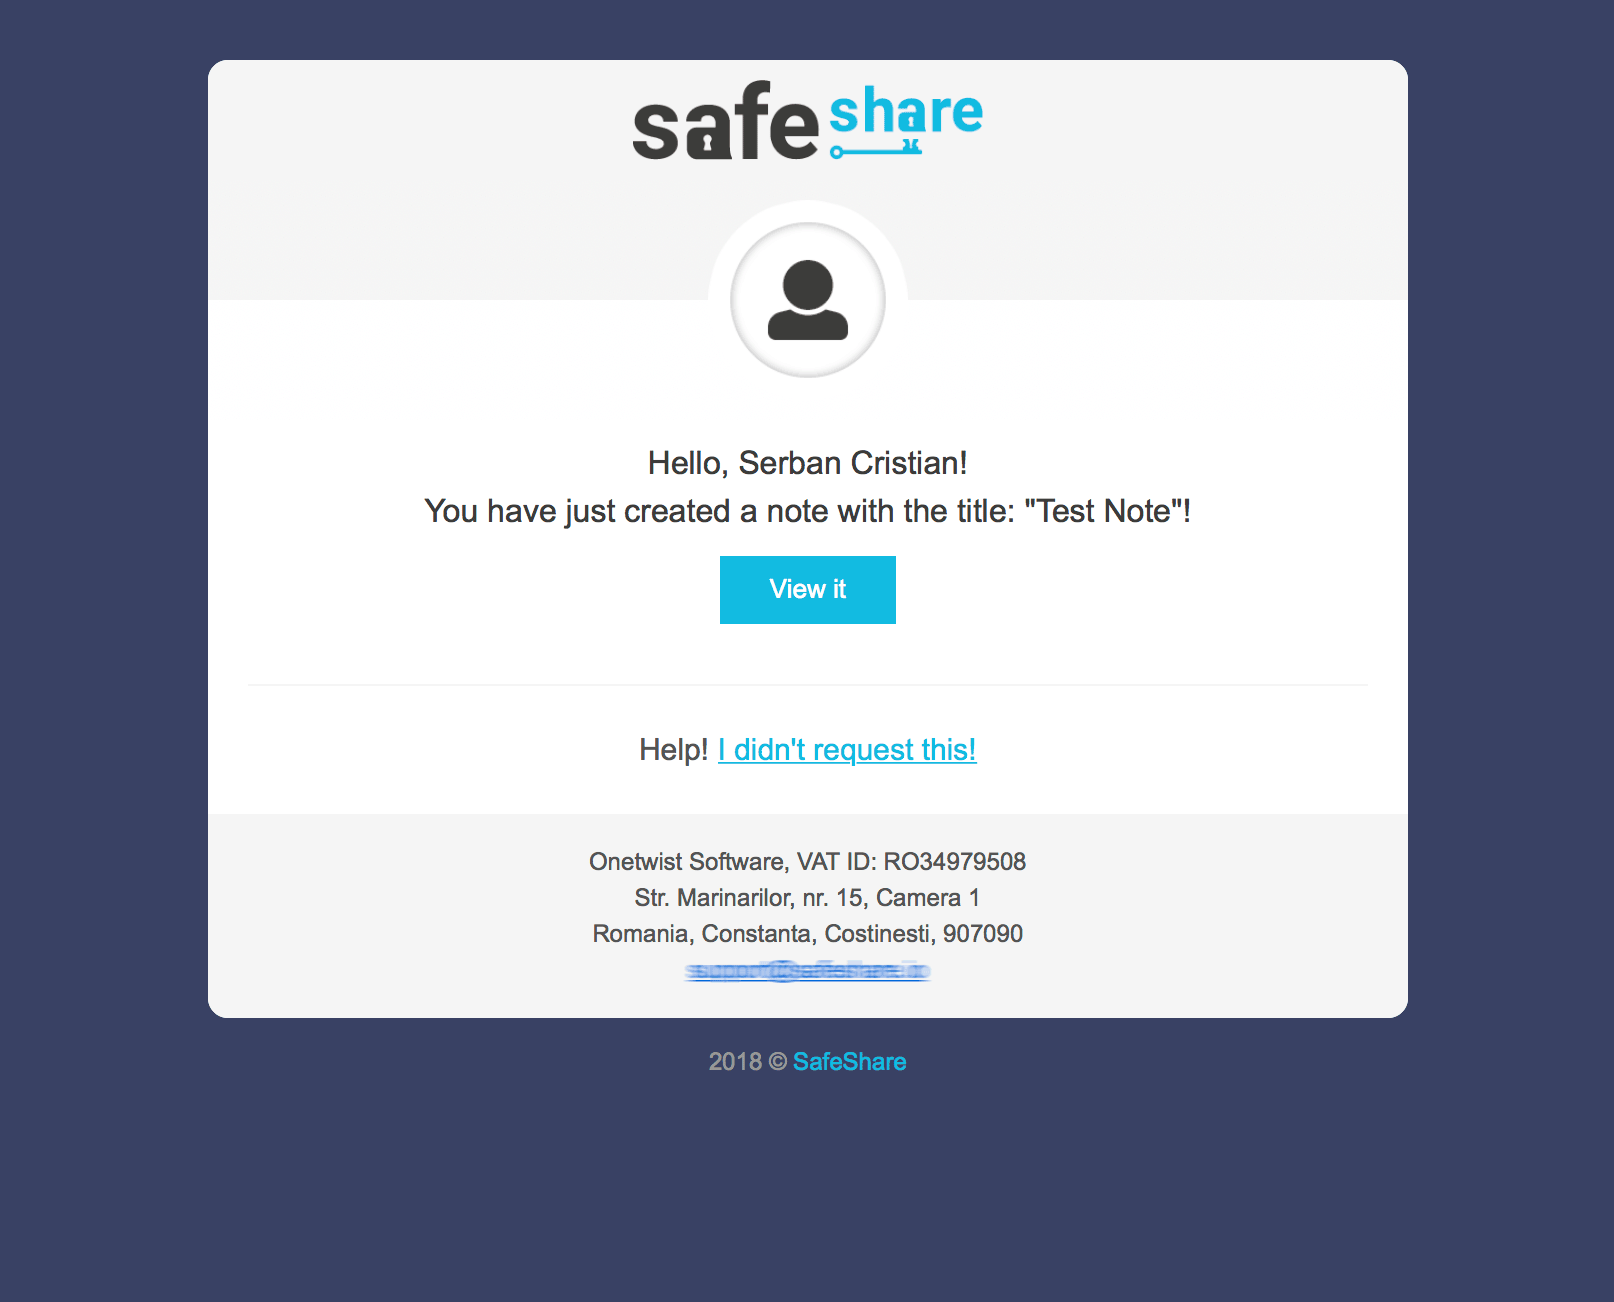 SafeShare - The right way to share private information - 6